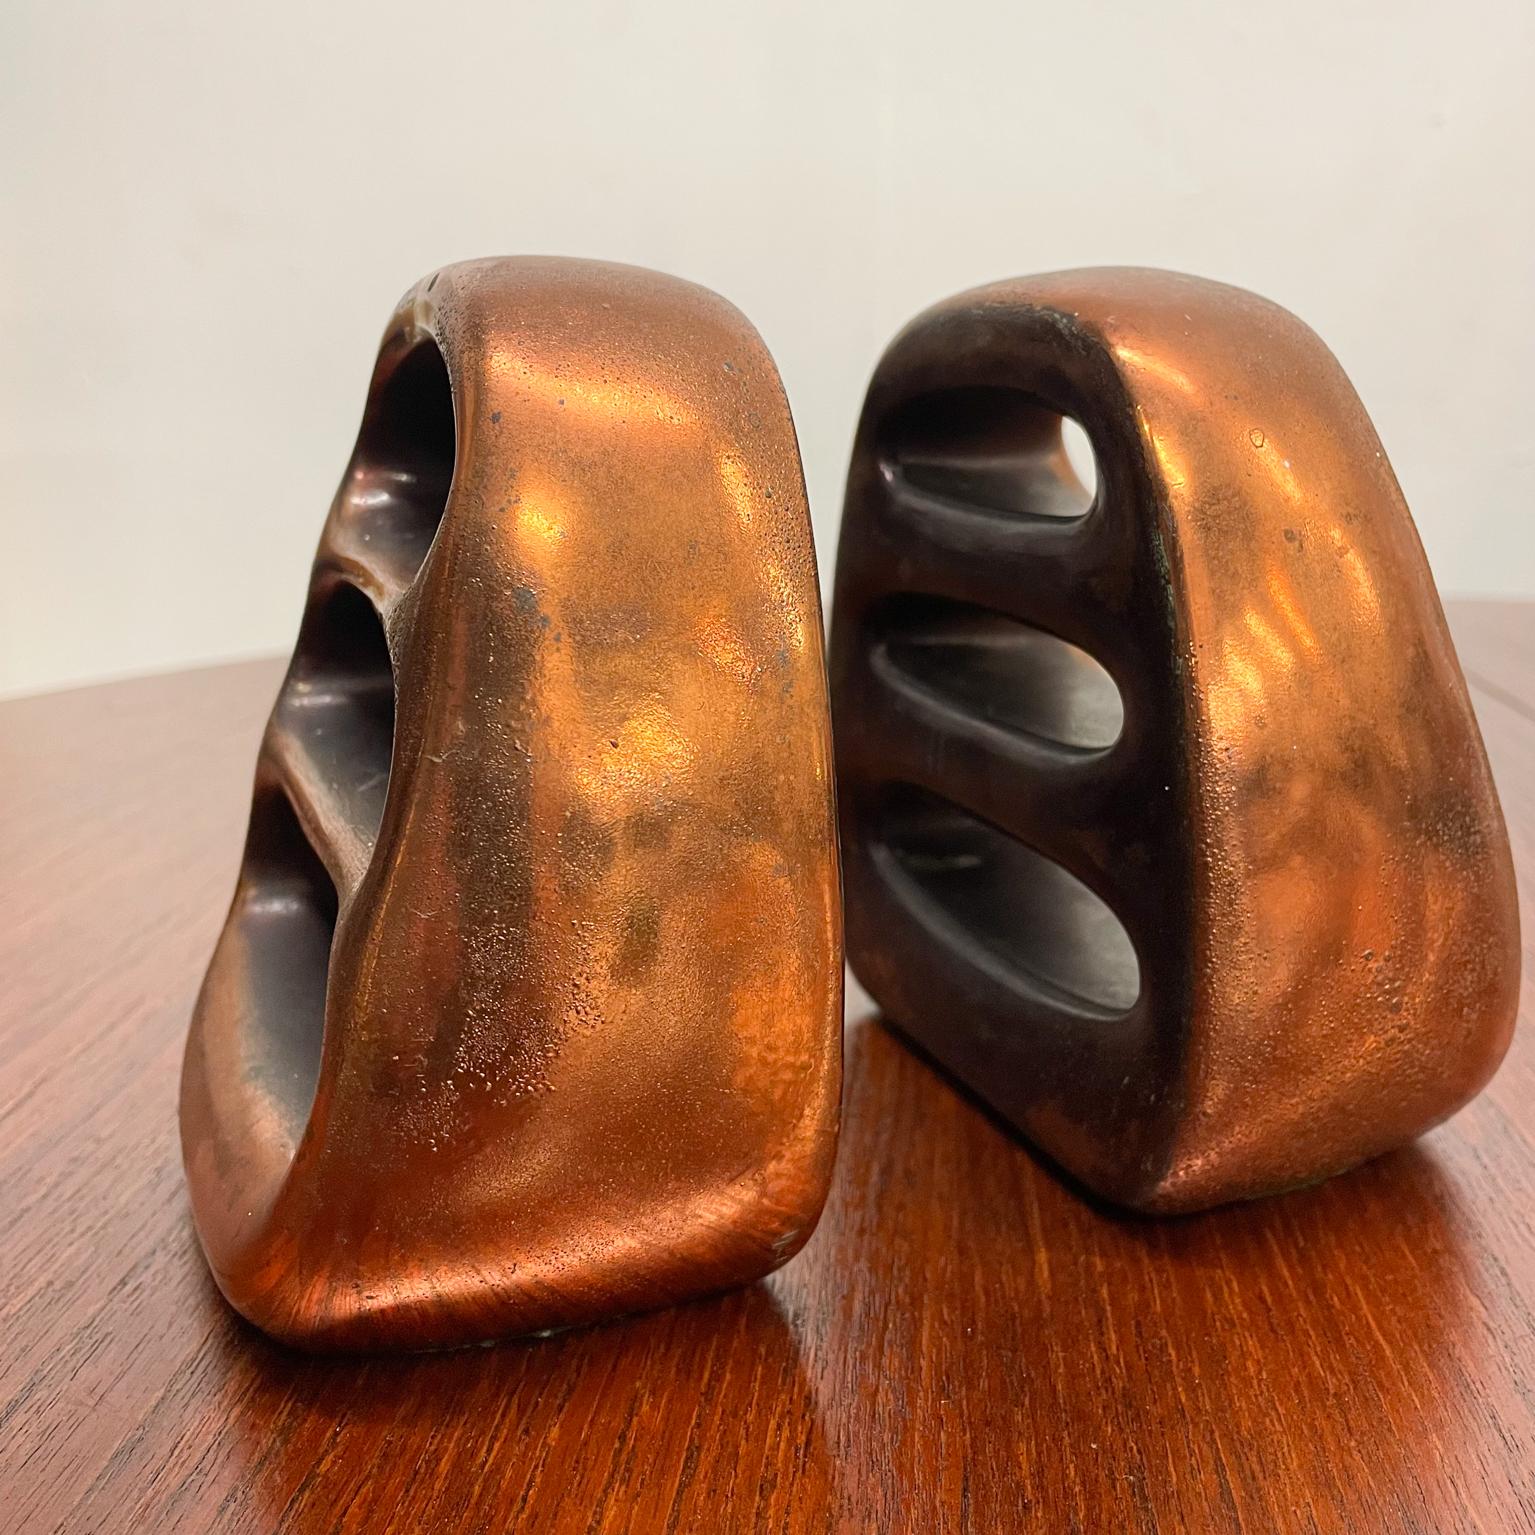 Ladder Bookends
Ben Seibel for Jenfred - Ware Sculptural Ladder Bookends Striking Midcentury Modern design 1950s
Crafted with Copper Plate
Original label is present
5.13h x 4.63 w x 2.88 d inches
Original Preowned Vintage unrestored